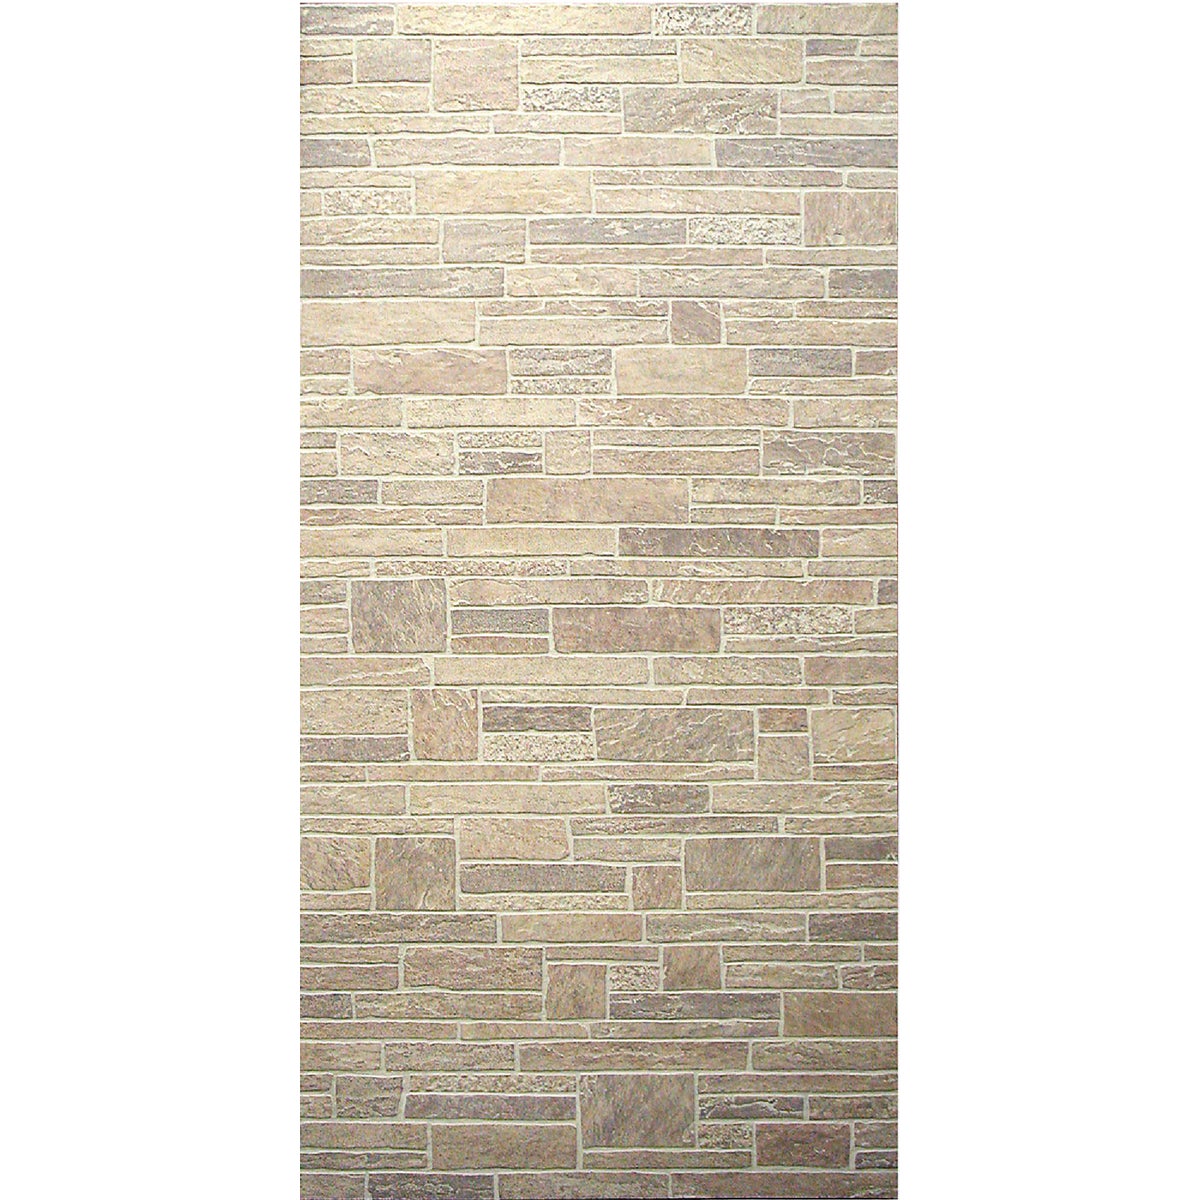 Item 109224, Wall paneling featuring the look and feel of random-cut, ashlar canyon 